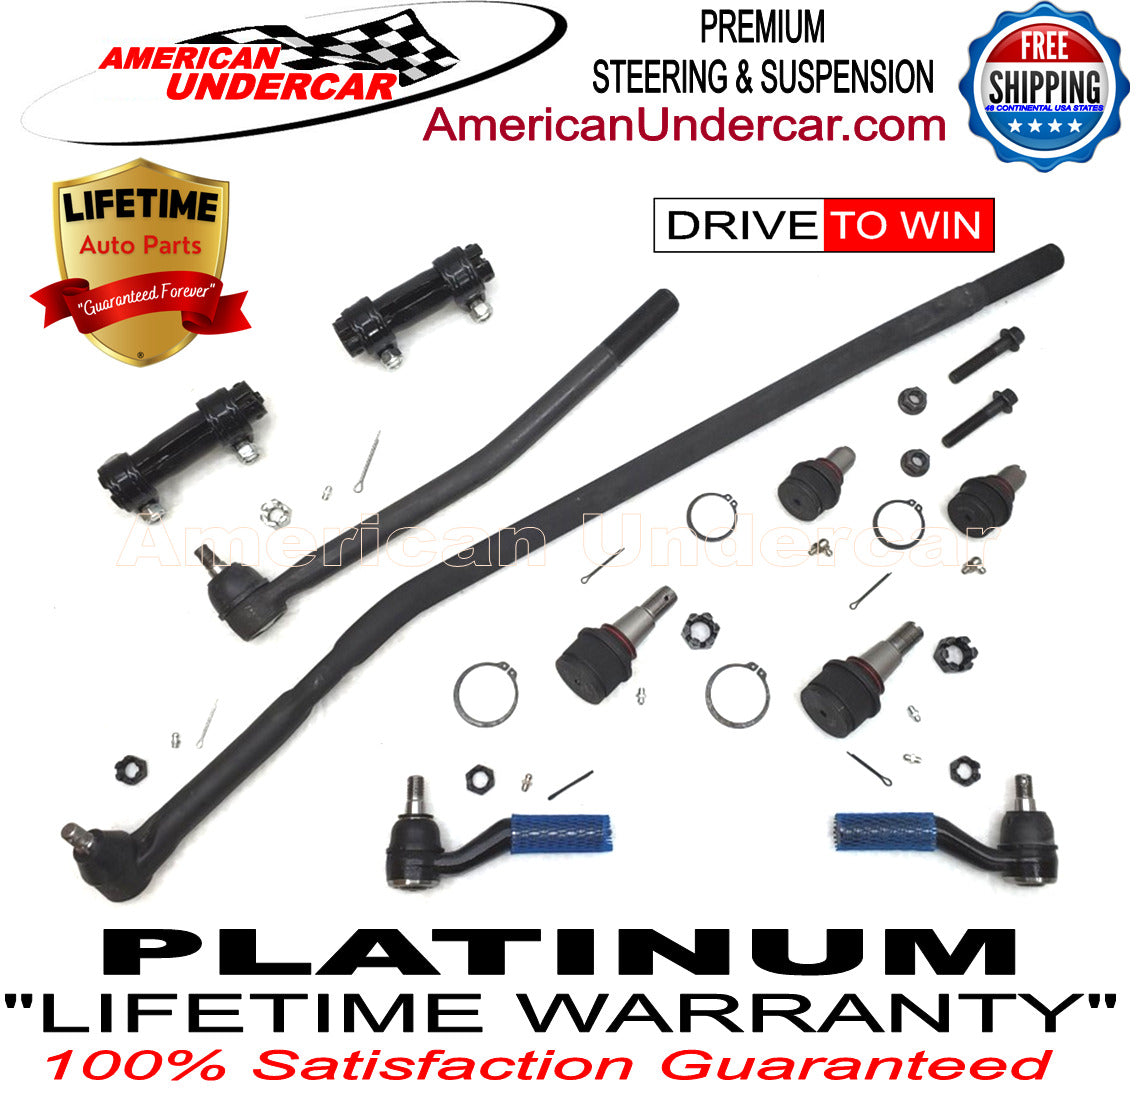 Lifetime Ball Joints Drag Link Tie Rod Sleeve Steering Kit for 2007-2014 Ford E250 2WD